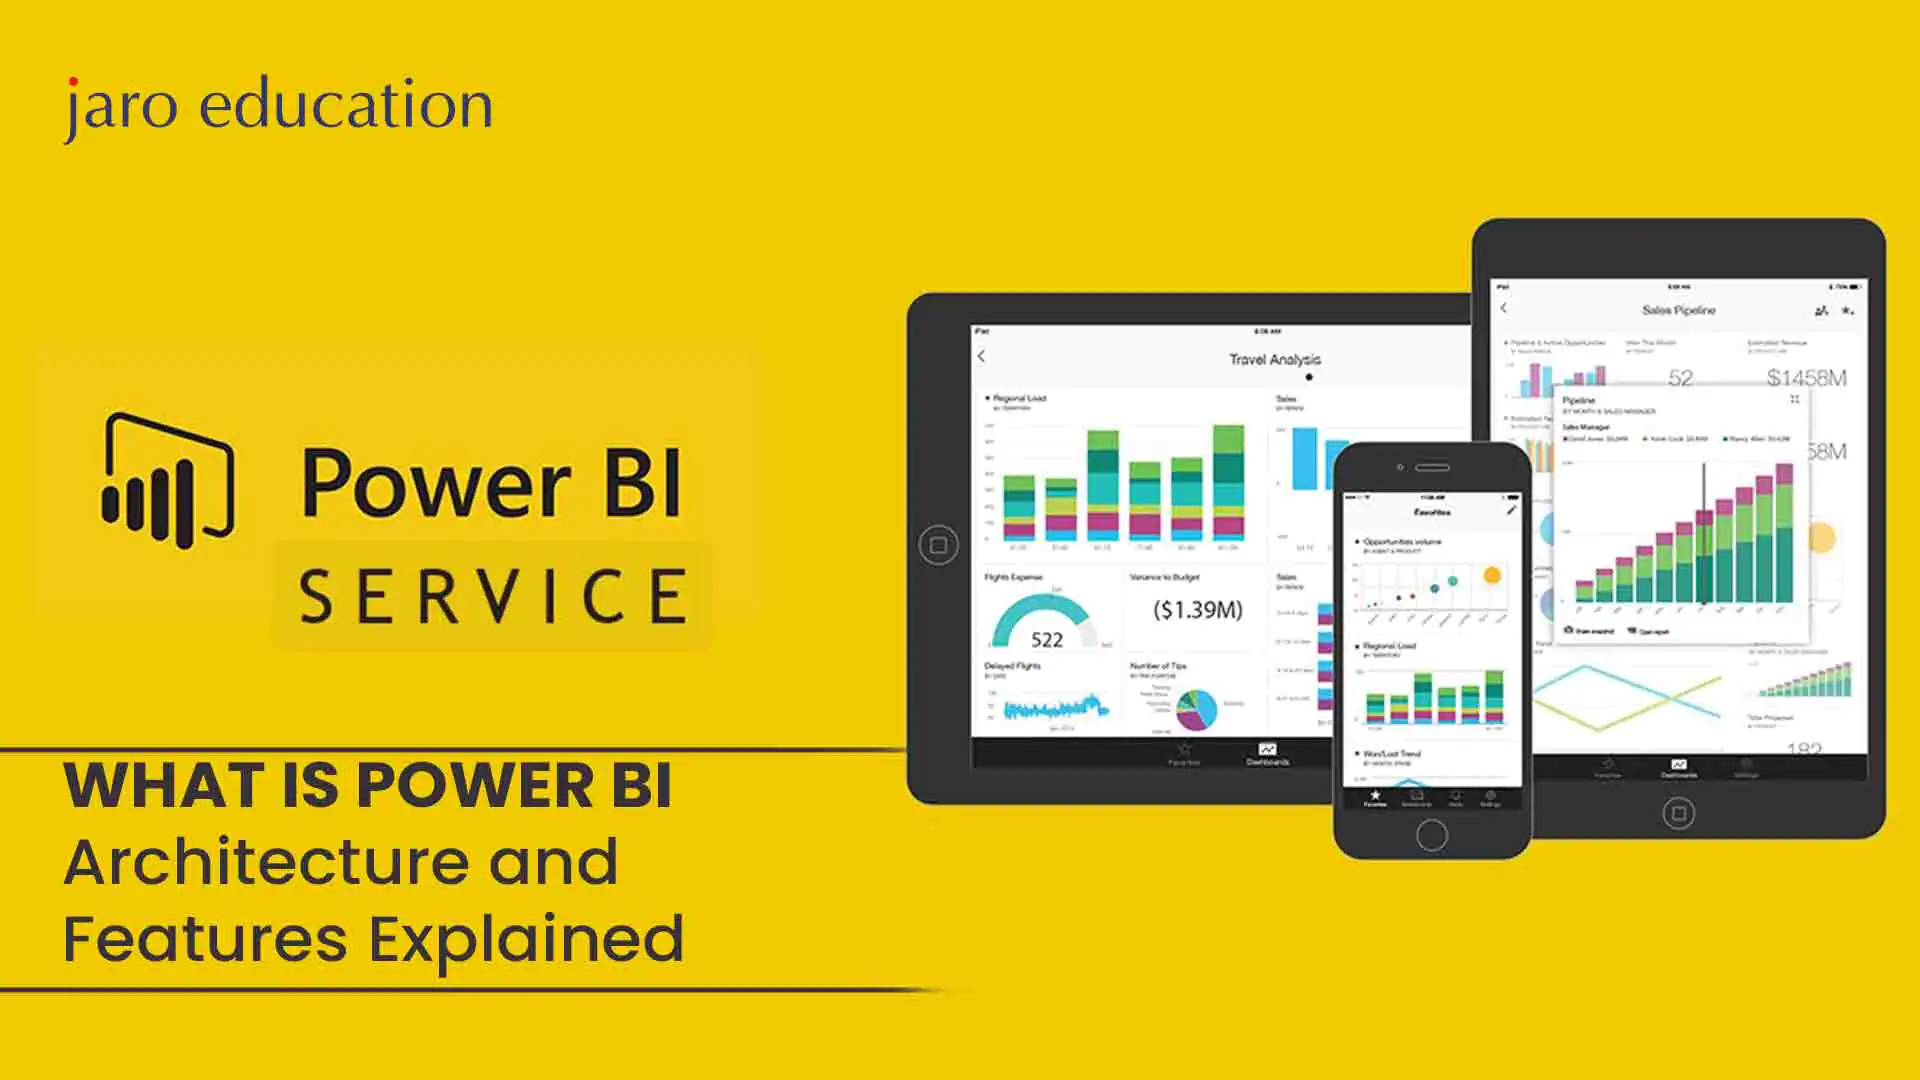 What is Power BI Architecture and Features Explained